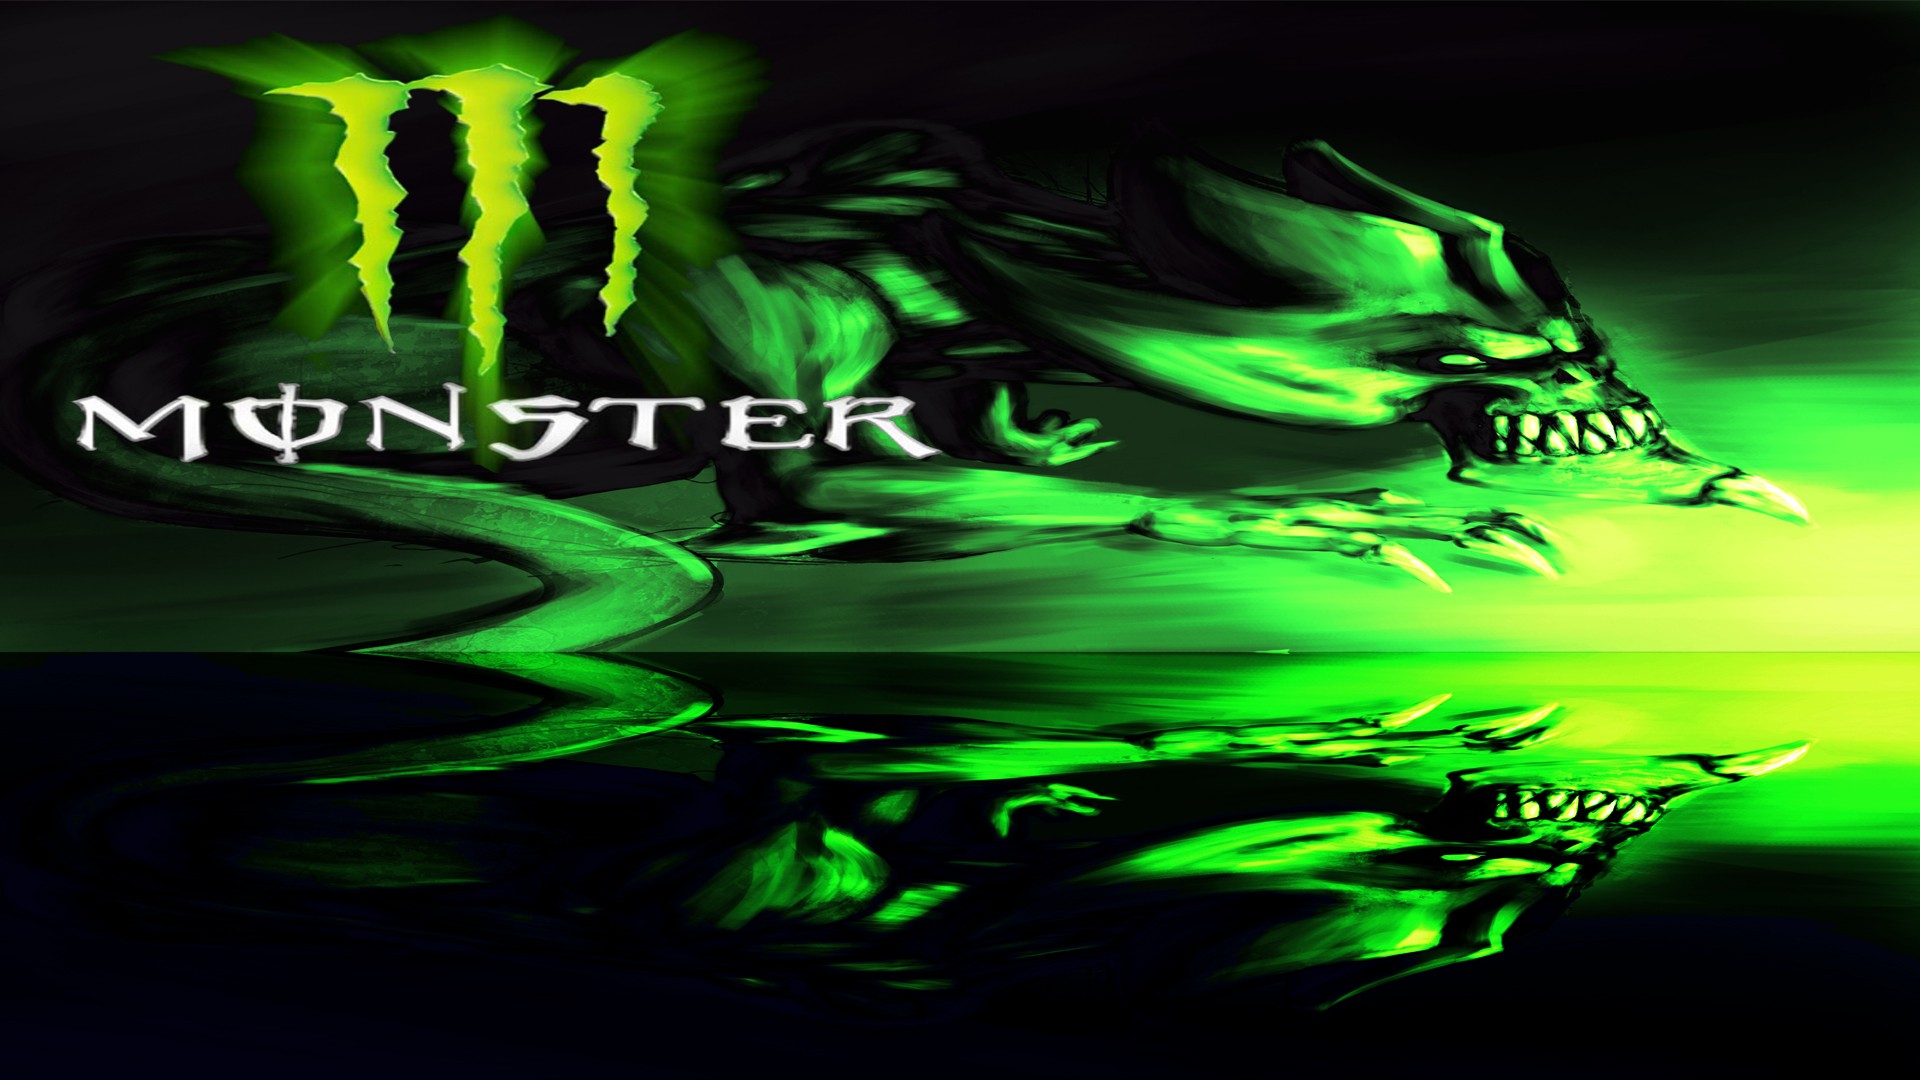 Monster Energy Wallpapers Pictures Images HD Wallpapers Download Free Images Wallpaper [wallpaper981.blogspot.com]